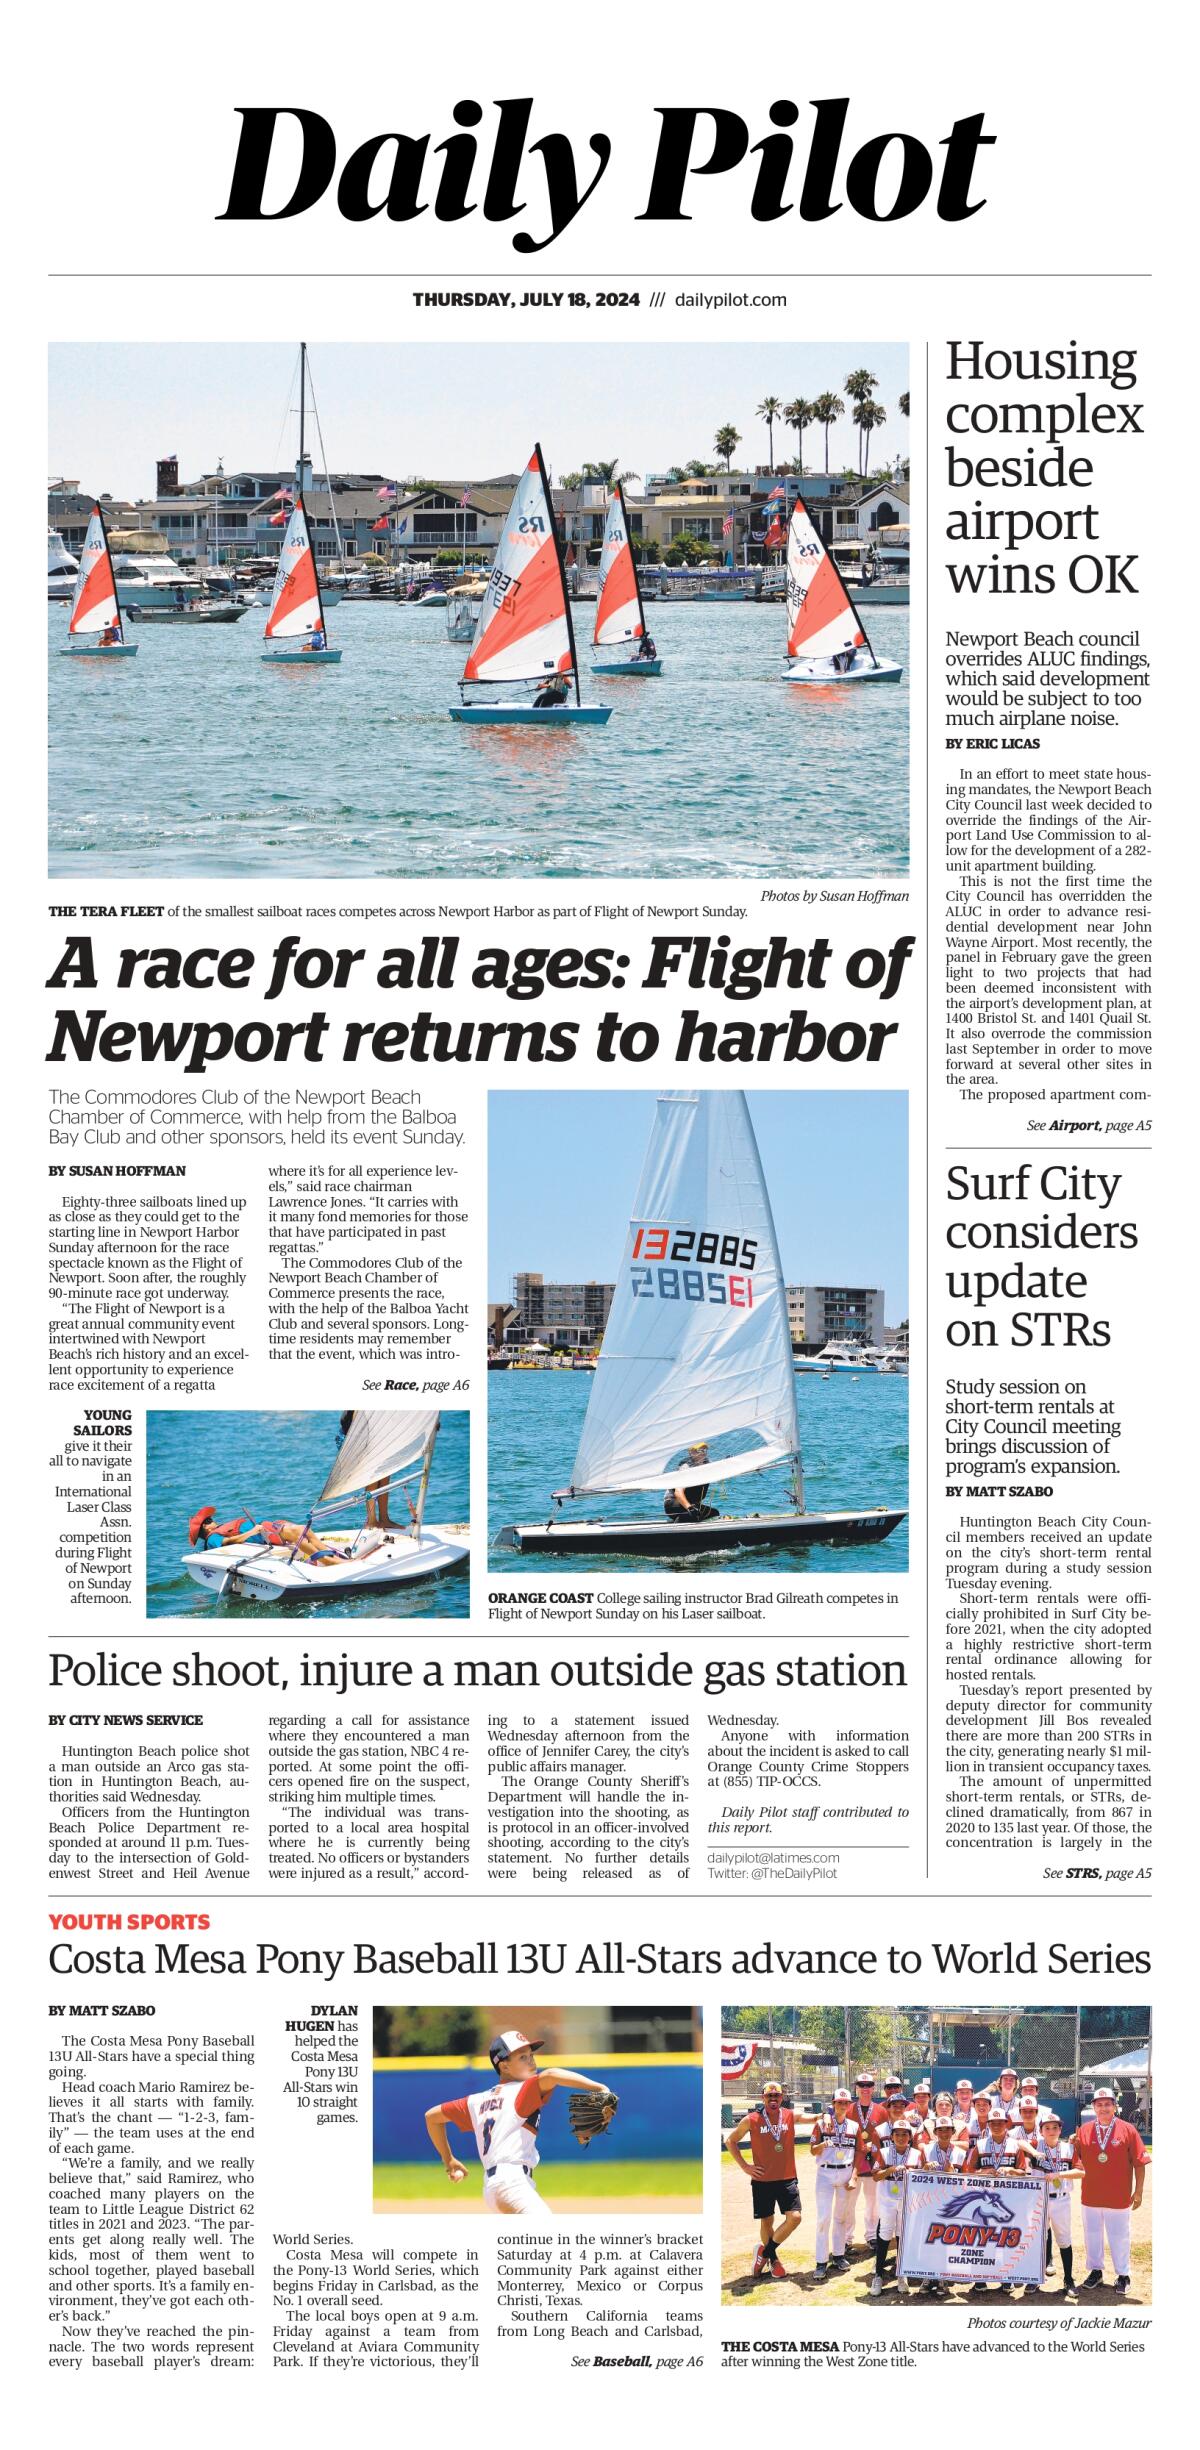 Front page of the Daily Pilot e-newspaper for Thursday, July 18, 2024.